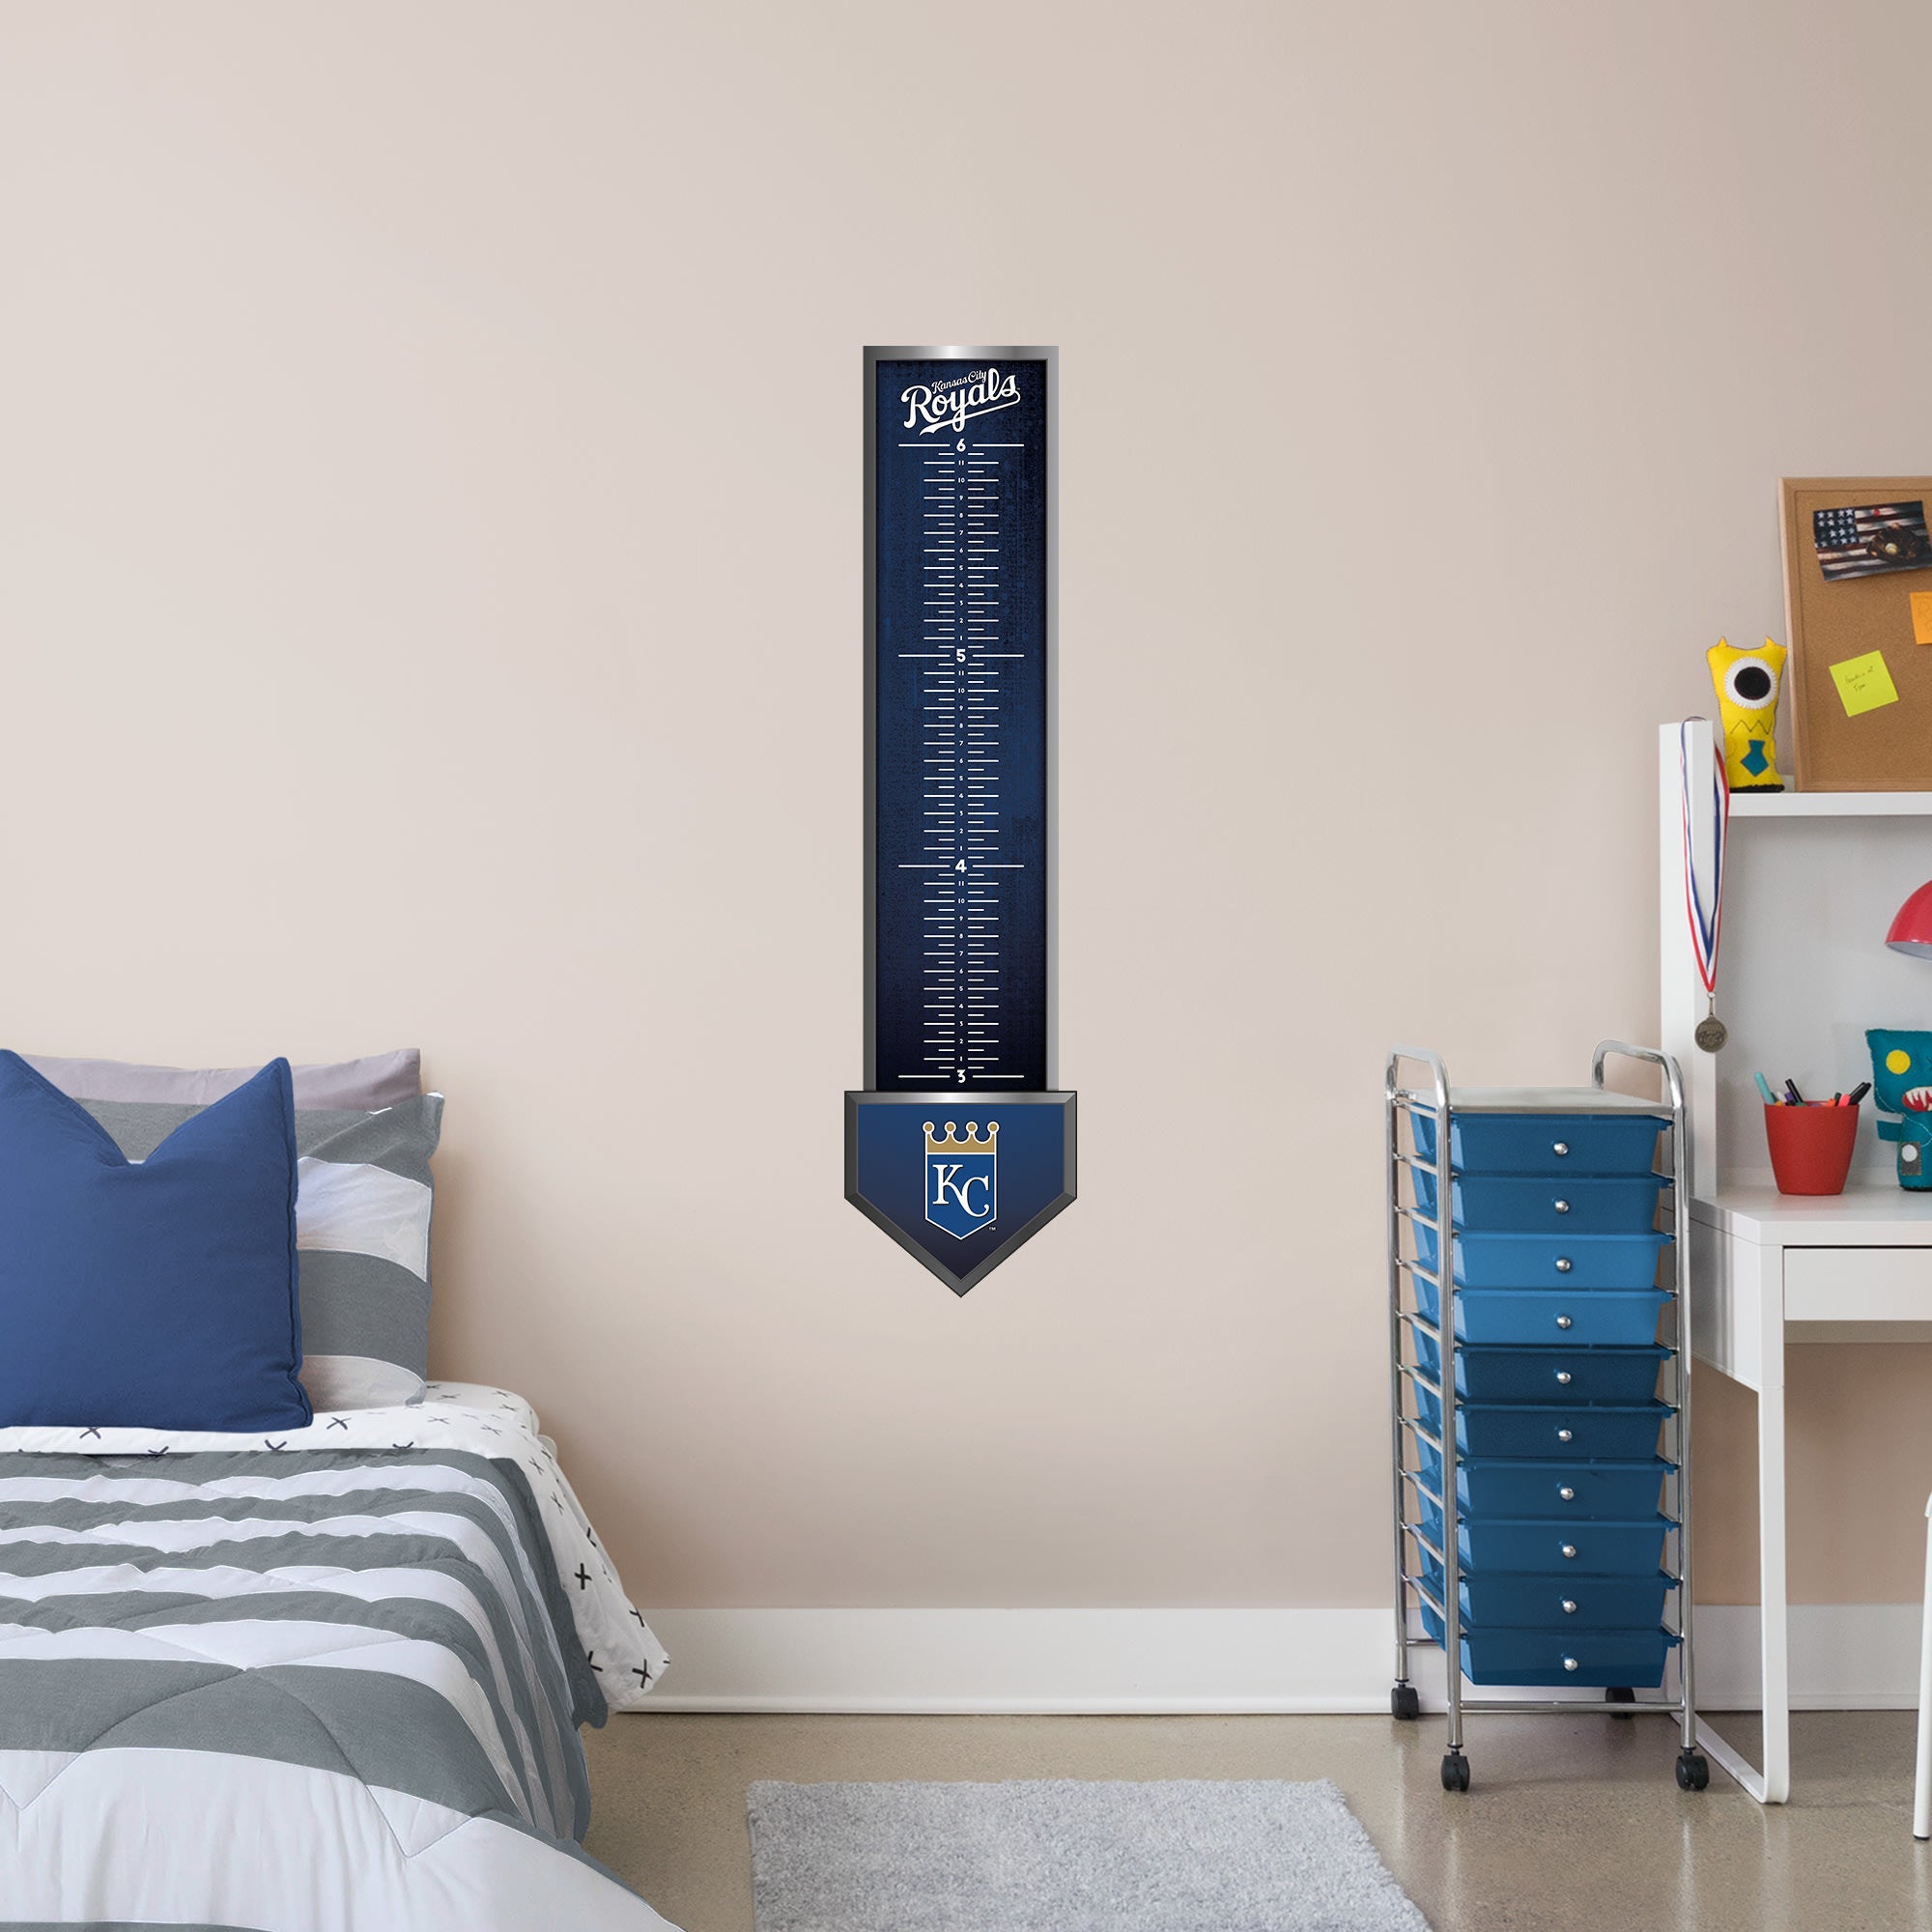 Kansas City Royals: Growth Chart - Officially Licensed MLB Removable Wall Graphic 13.0"W x 54.0"H by Fathead | Vinyl